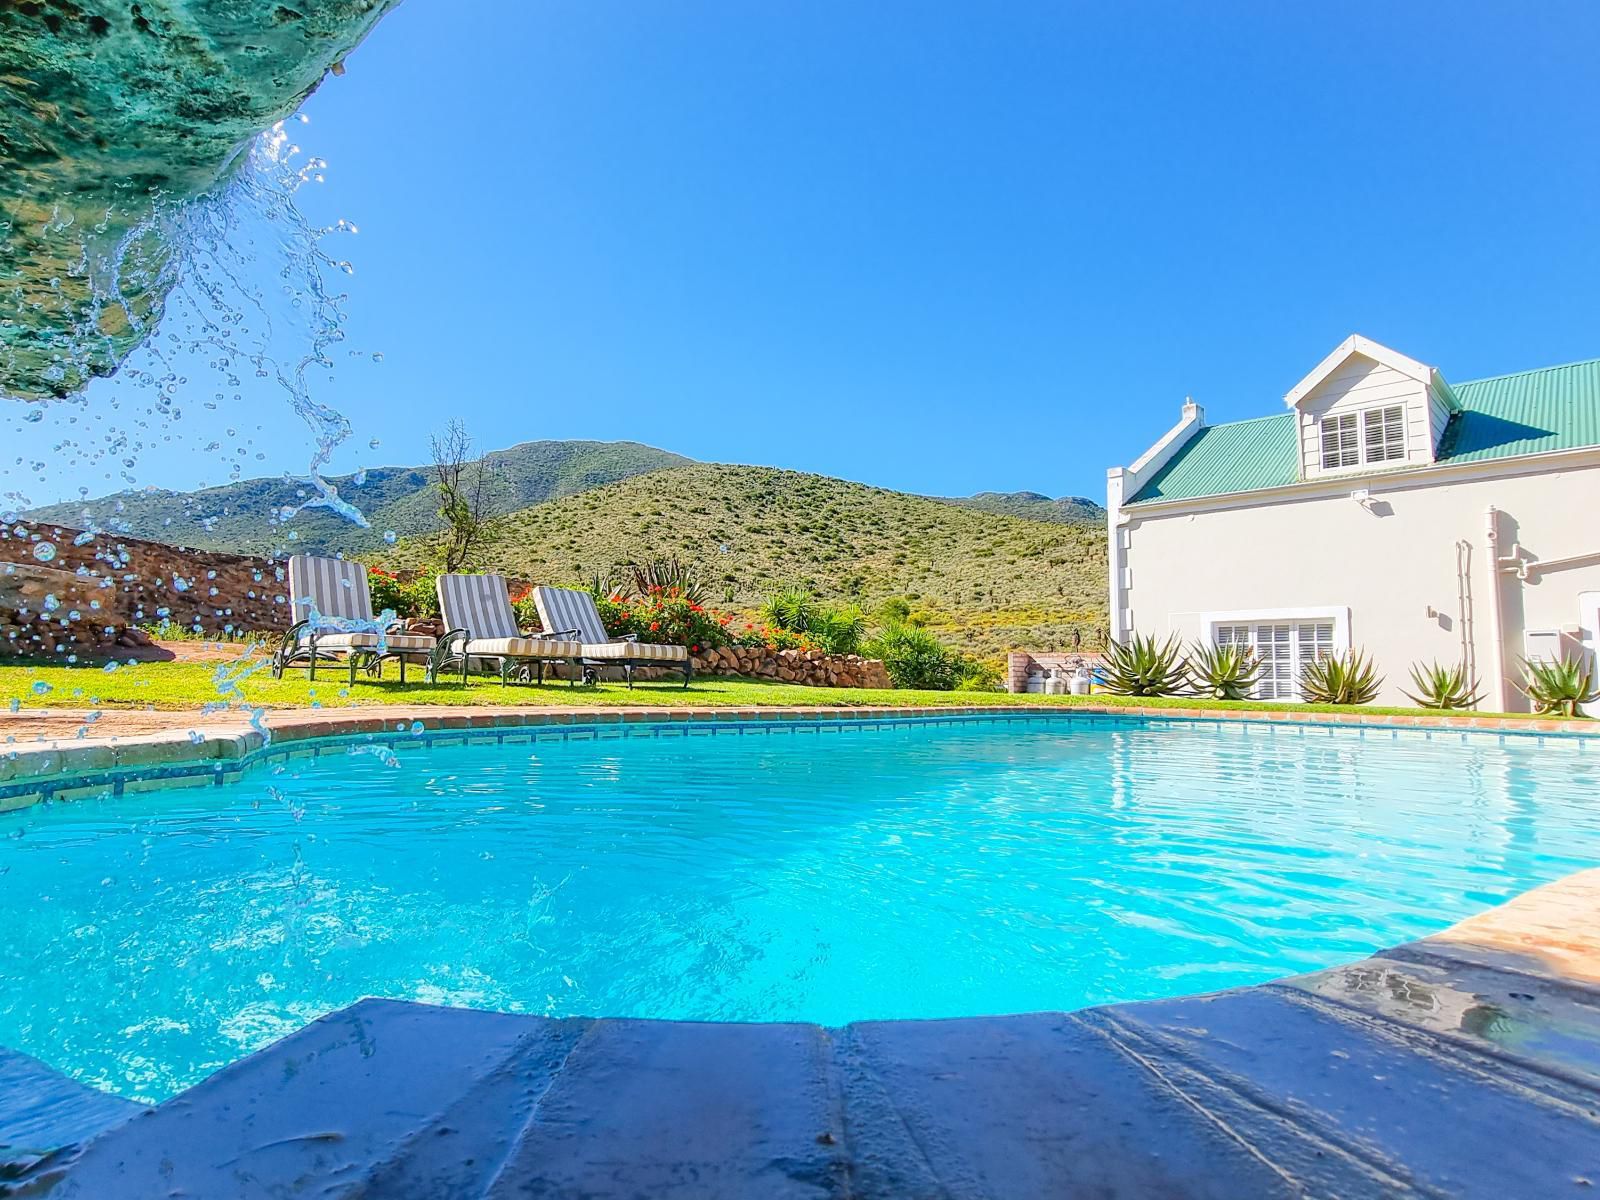 Berluda Farmhouse And Cottages Oudtshoorn Western Cape South Africa Colorful, Swimming Pool